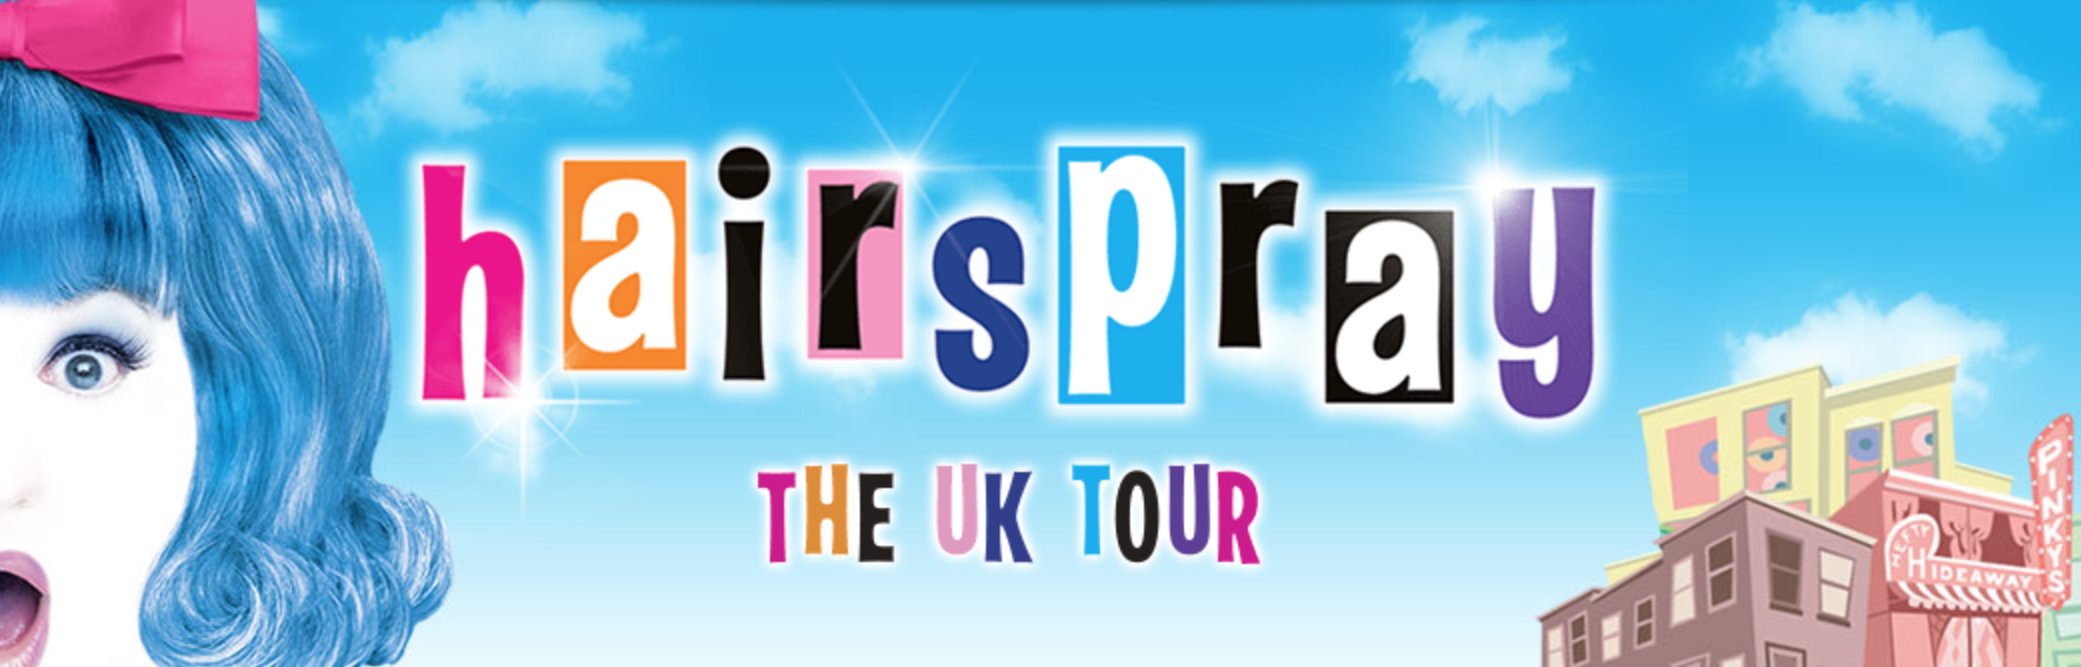 Hairspray UK Tour | Theatre Review